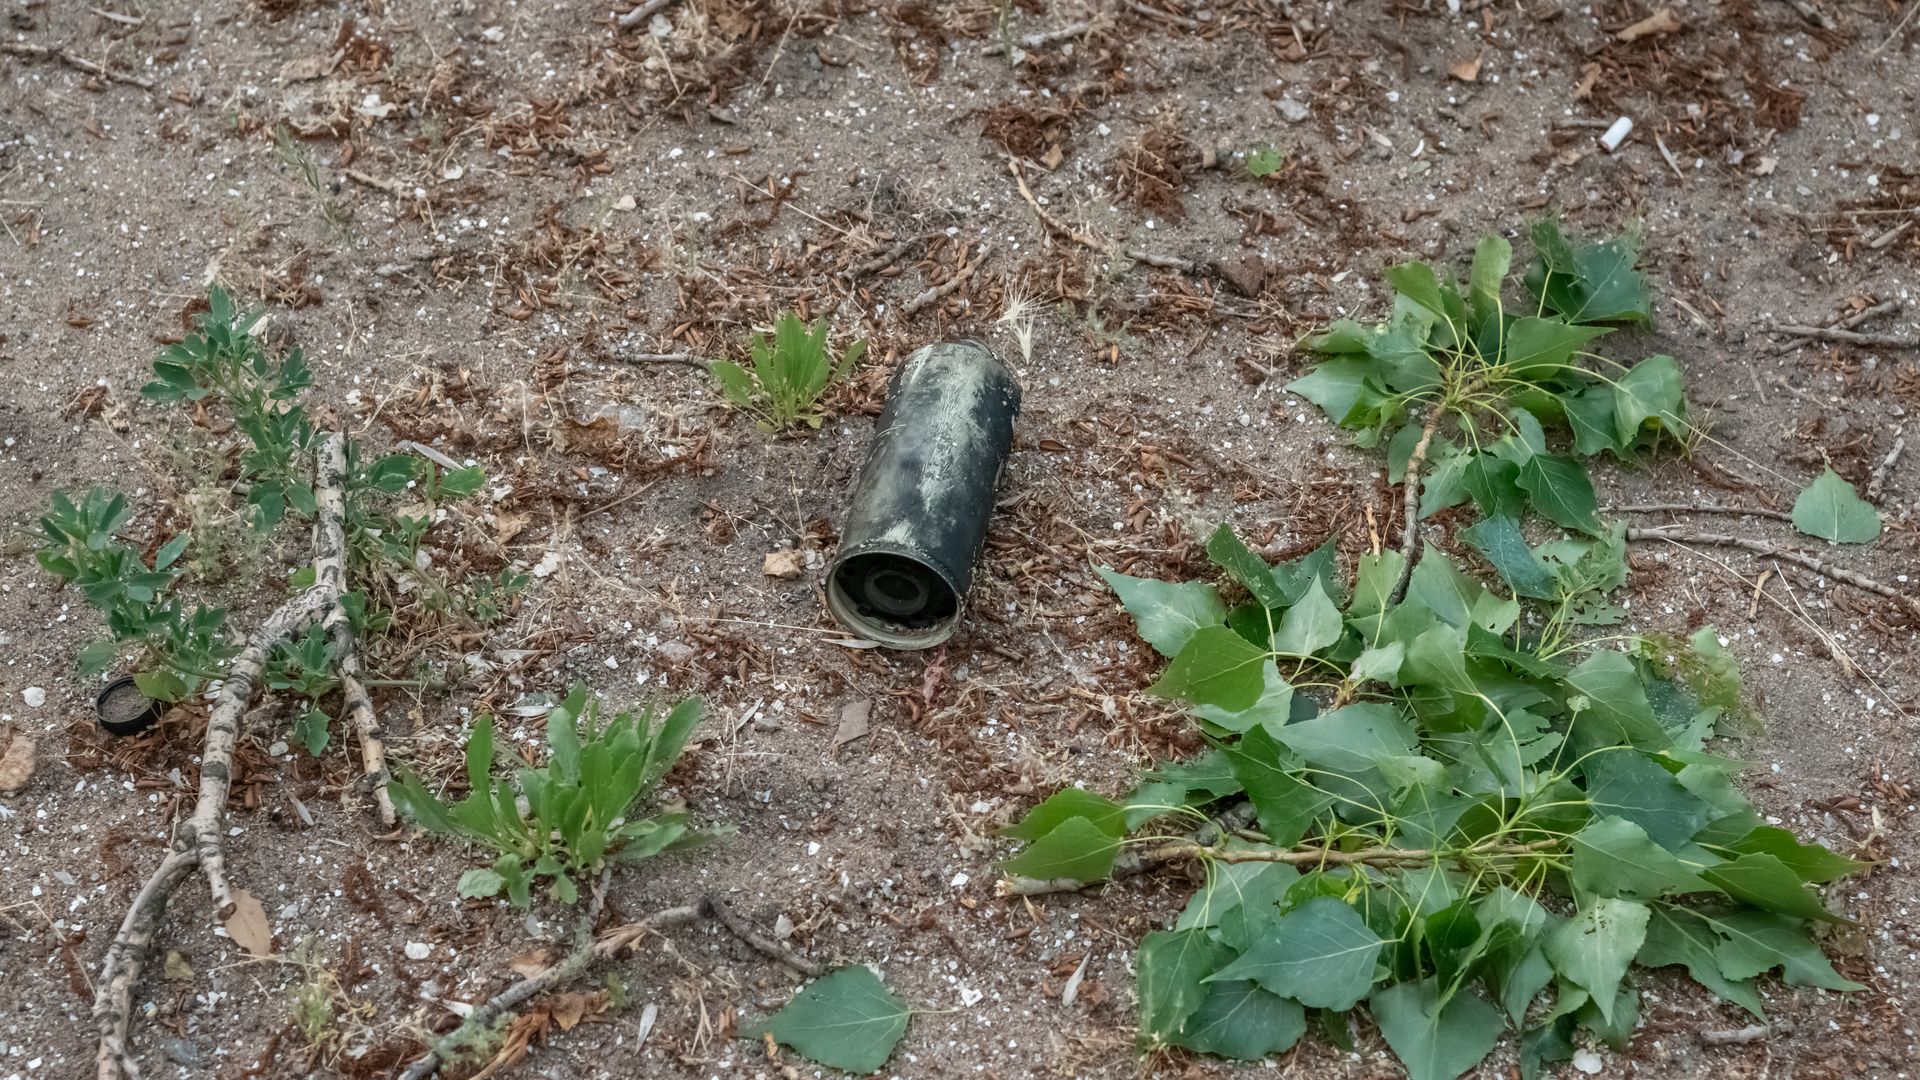 One-of-four parts of a cluster bomb found on the ground in Ukraine